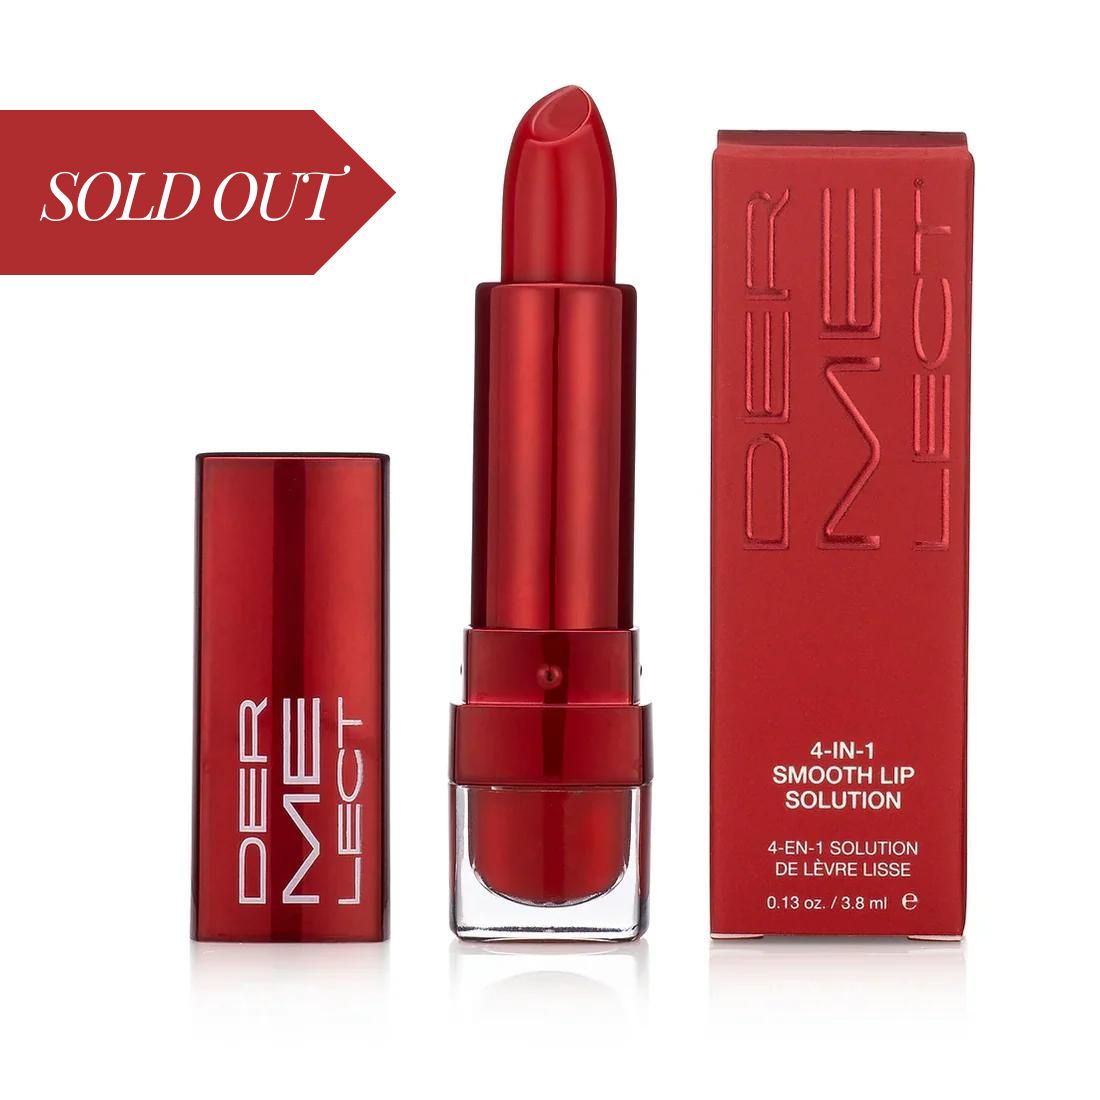 4-in-1 Smooth Lip Solution Obsessive: Full Power Red